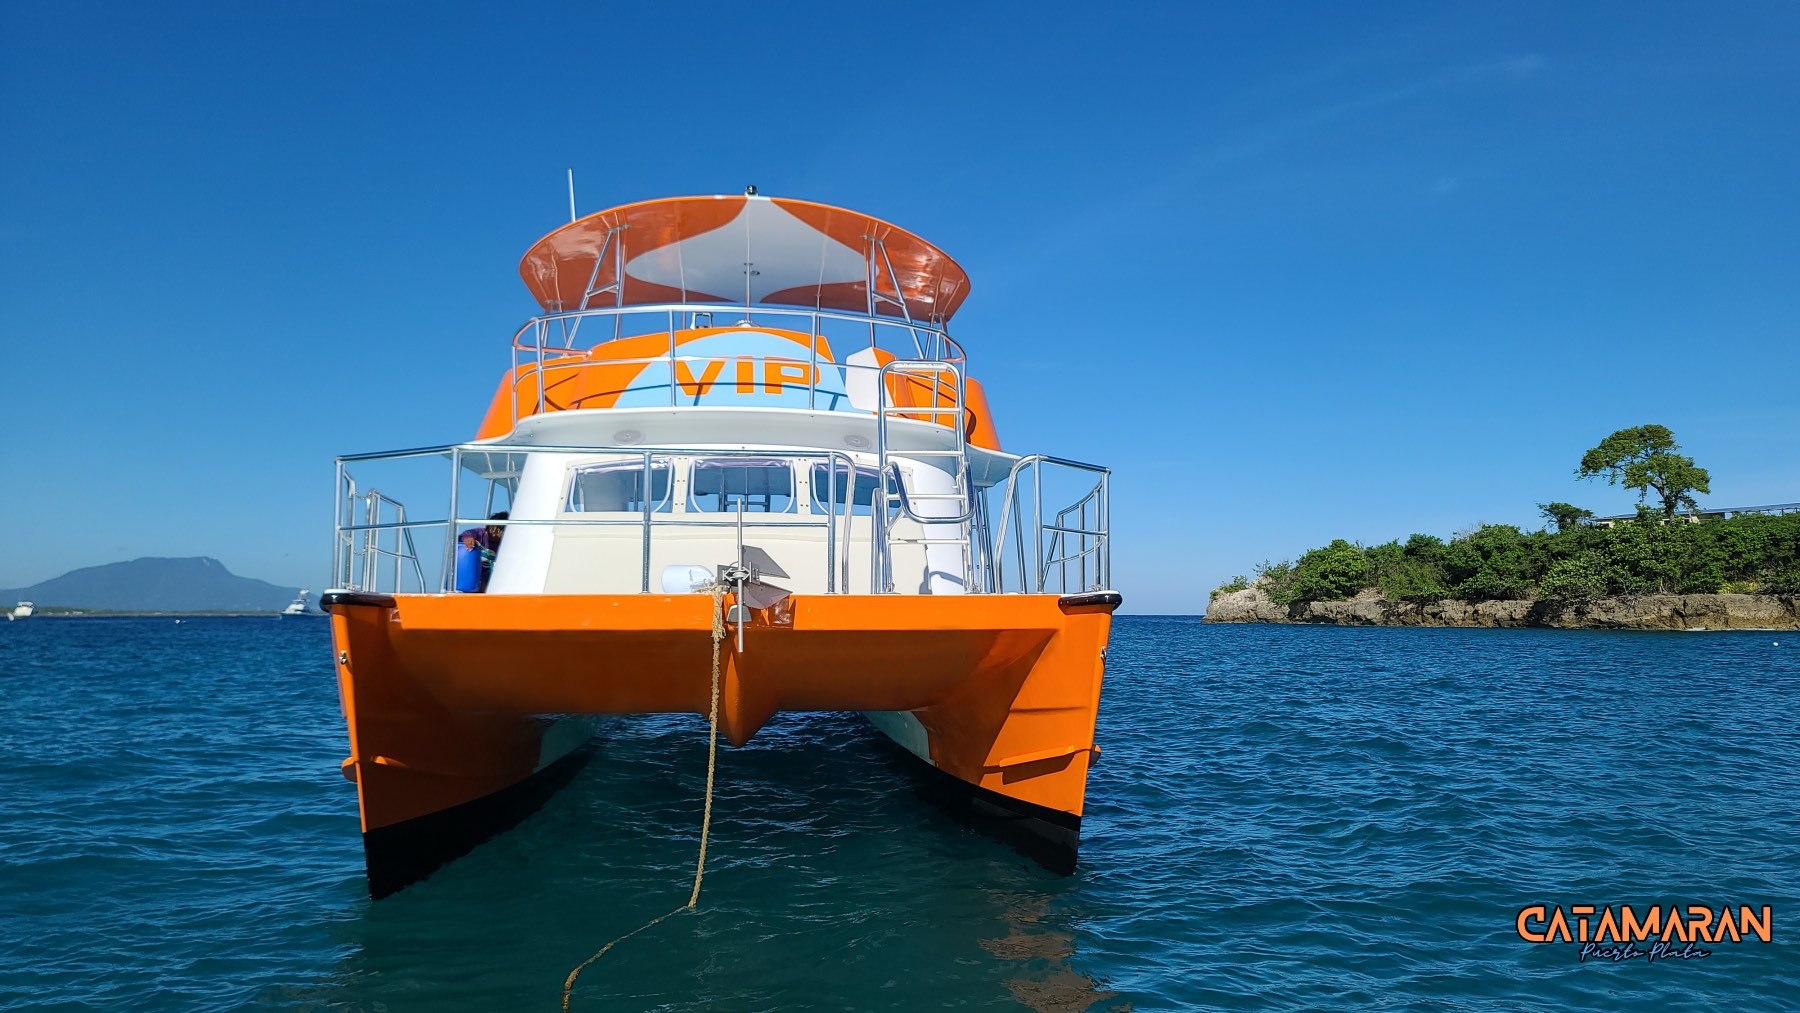 Front view of the catamaran